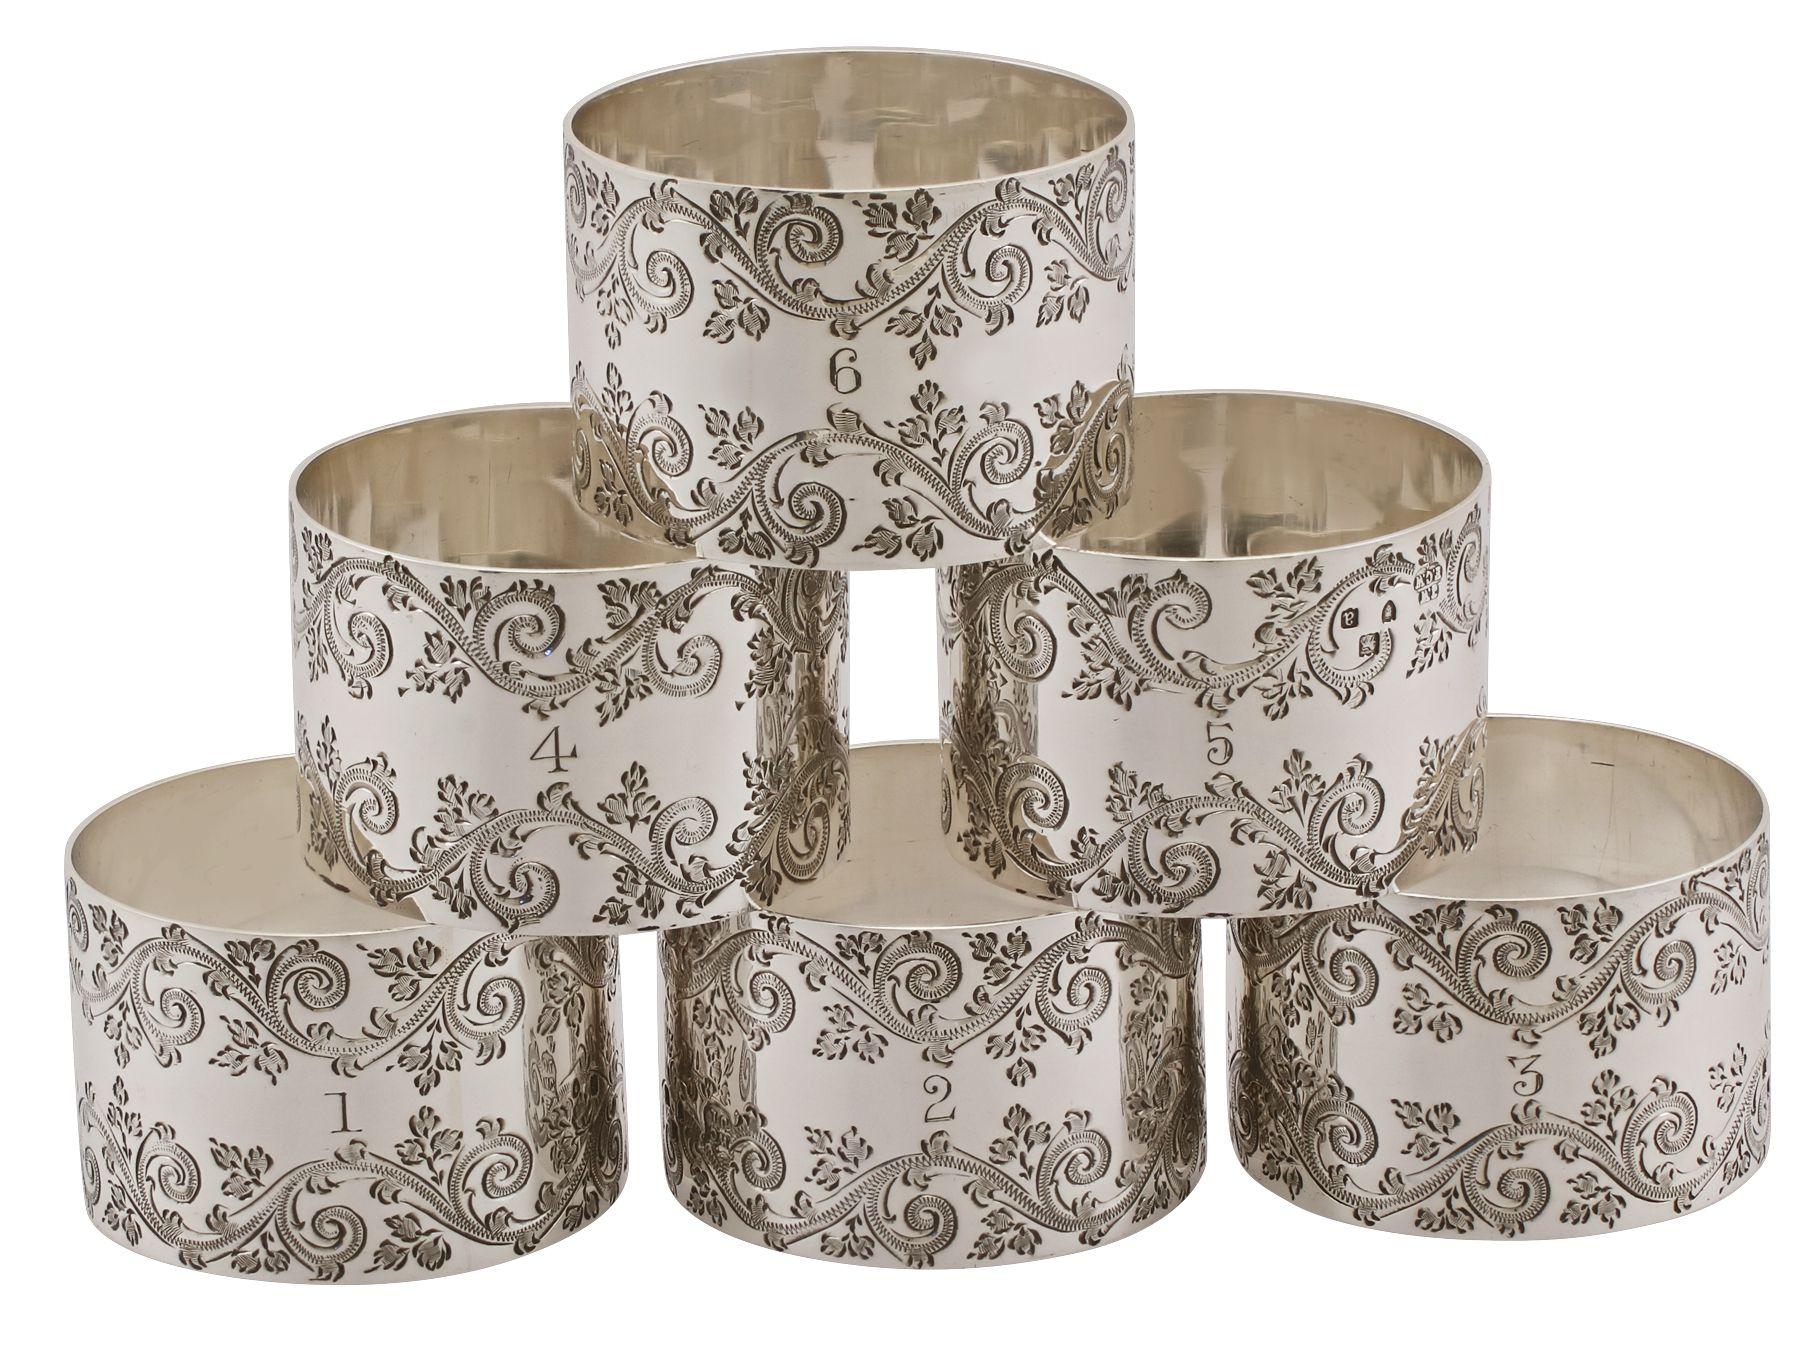 An exceptional, fine and impressive set of six individually numbered antique Victorian English sterling silver napkin rings - boxed; part of our silver dining collection.

This exceptional, fine and impressive set of antique Victorian numbered